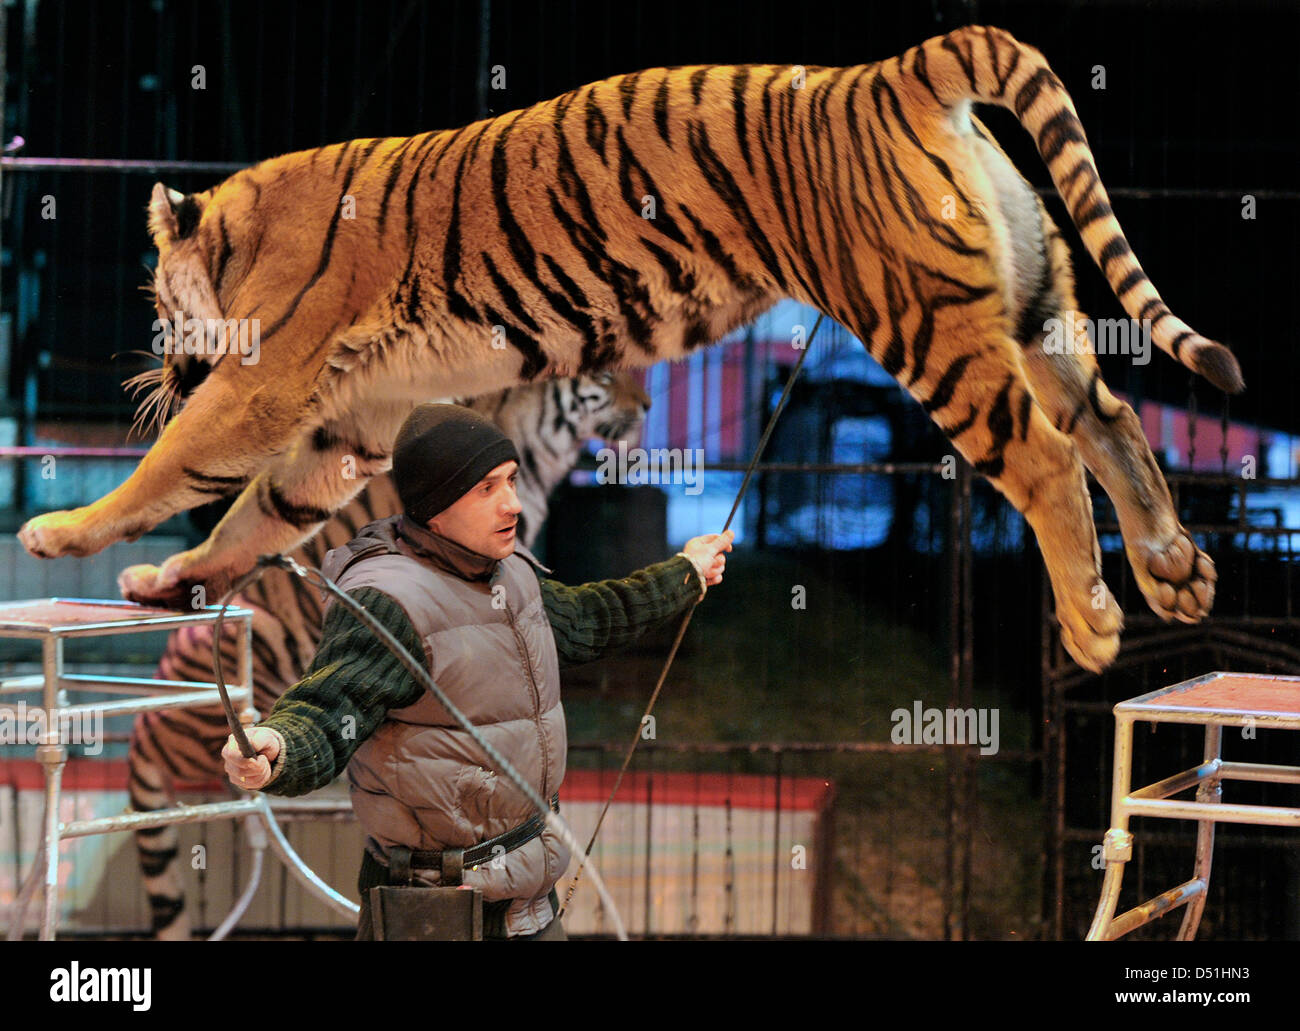 A tiger jumps over animal trainer Christian Walliser in the circus ring of  the Circus Barelli in Frankfurt Main, Germany, 16 December 2010. The  rehearsal is an act of trust between human